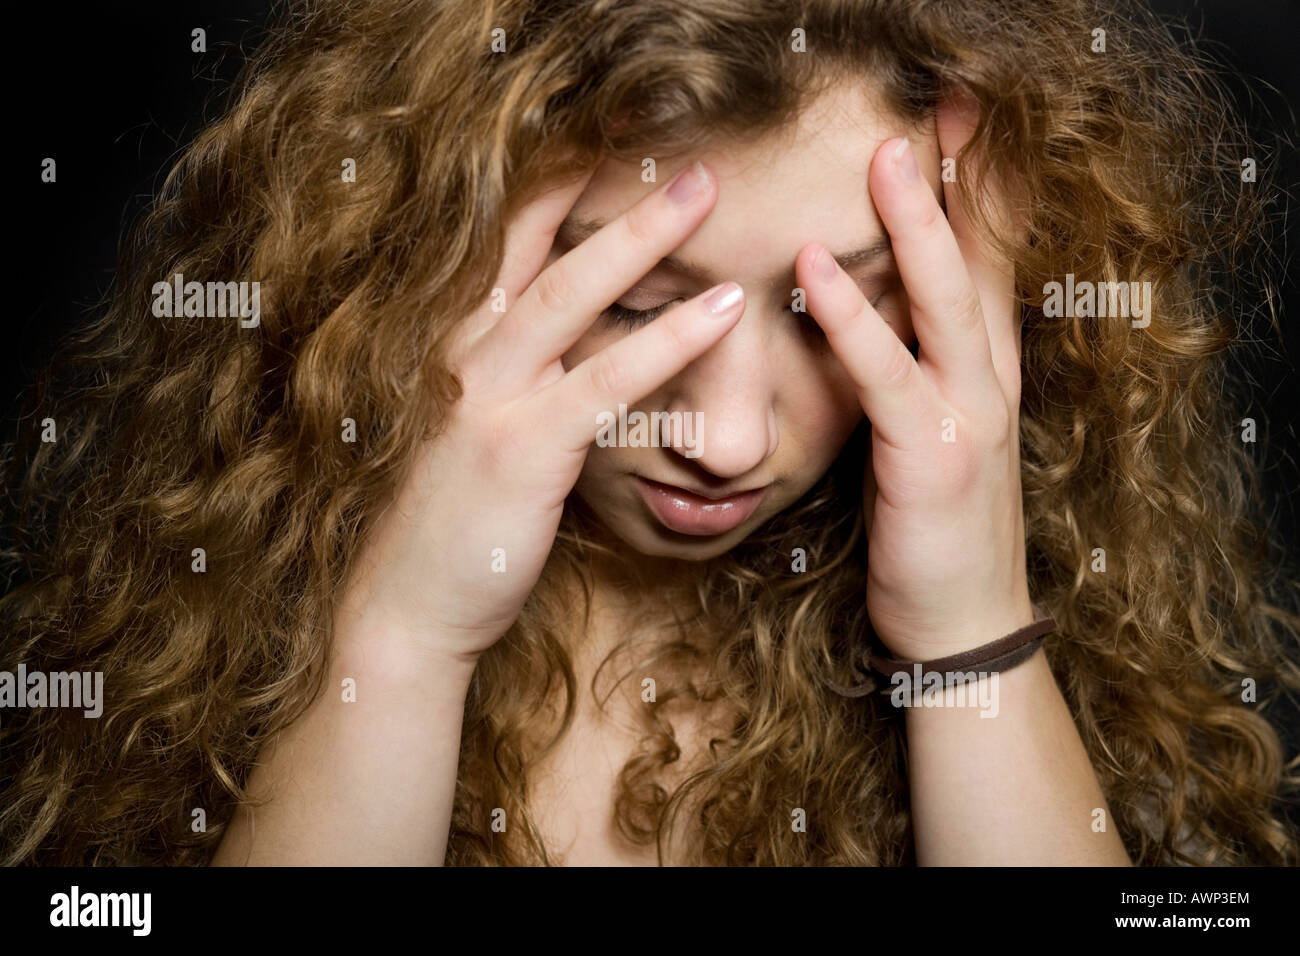 Distraught young woman holding her hands to her face Stock Photo